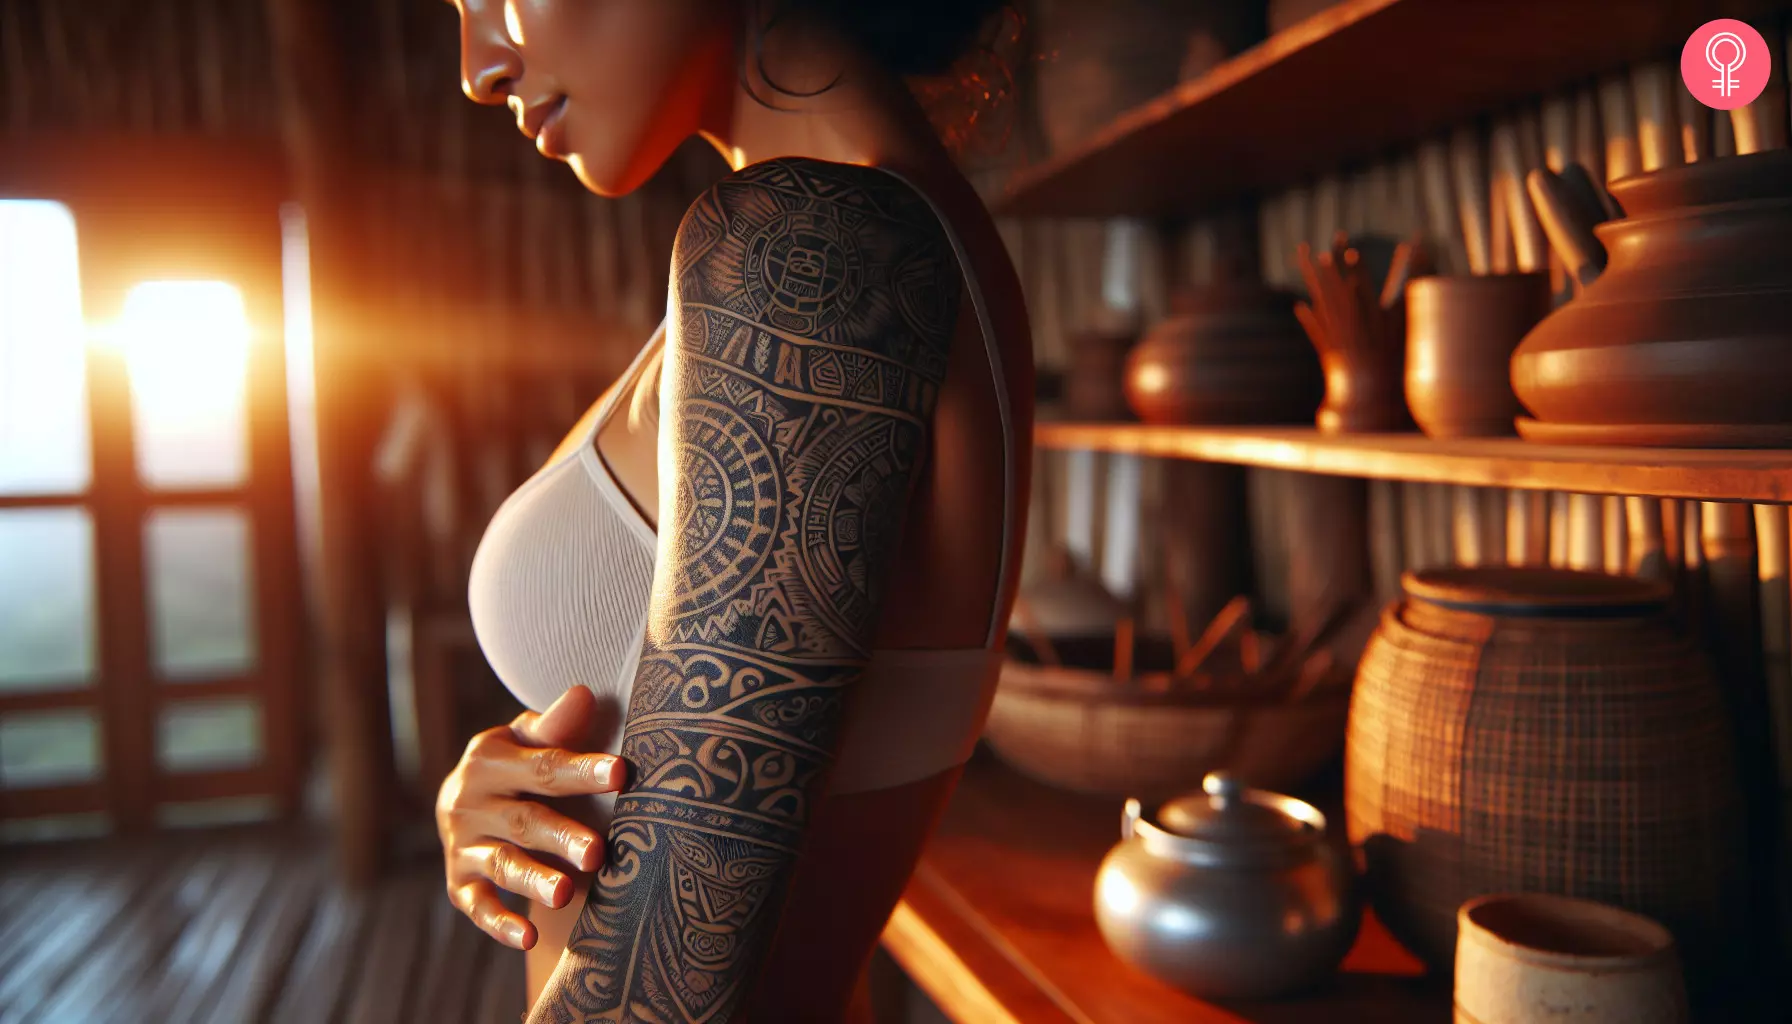 An ancient Mayan tattoo on a woman’s arm